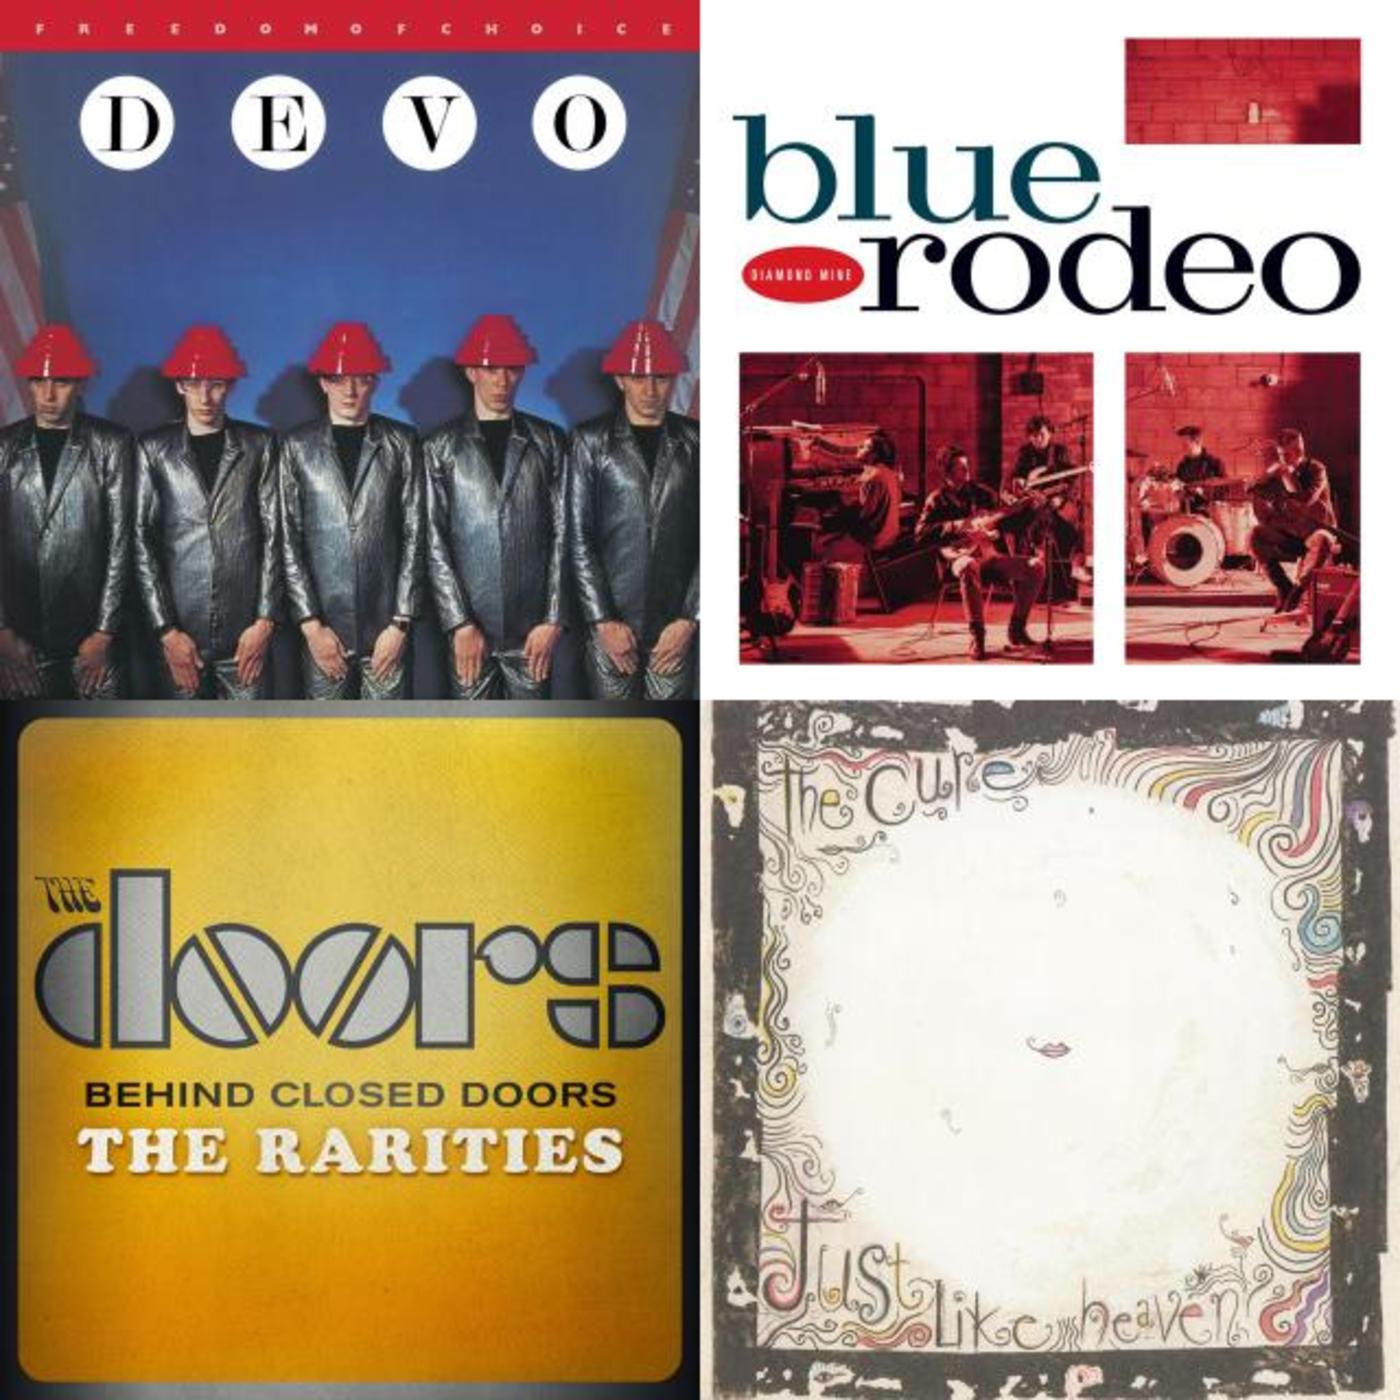 Record Store Day 2014 - Blue Rodeo, The Cure, Devo, The Doors, The Dresden Dolls, The Everly Brothers, Gram Parsons, Fleetwood Mac, Donny Hathaway, Husker Du, Ice T, The Idle Race